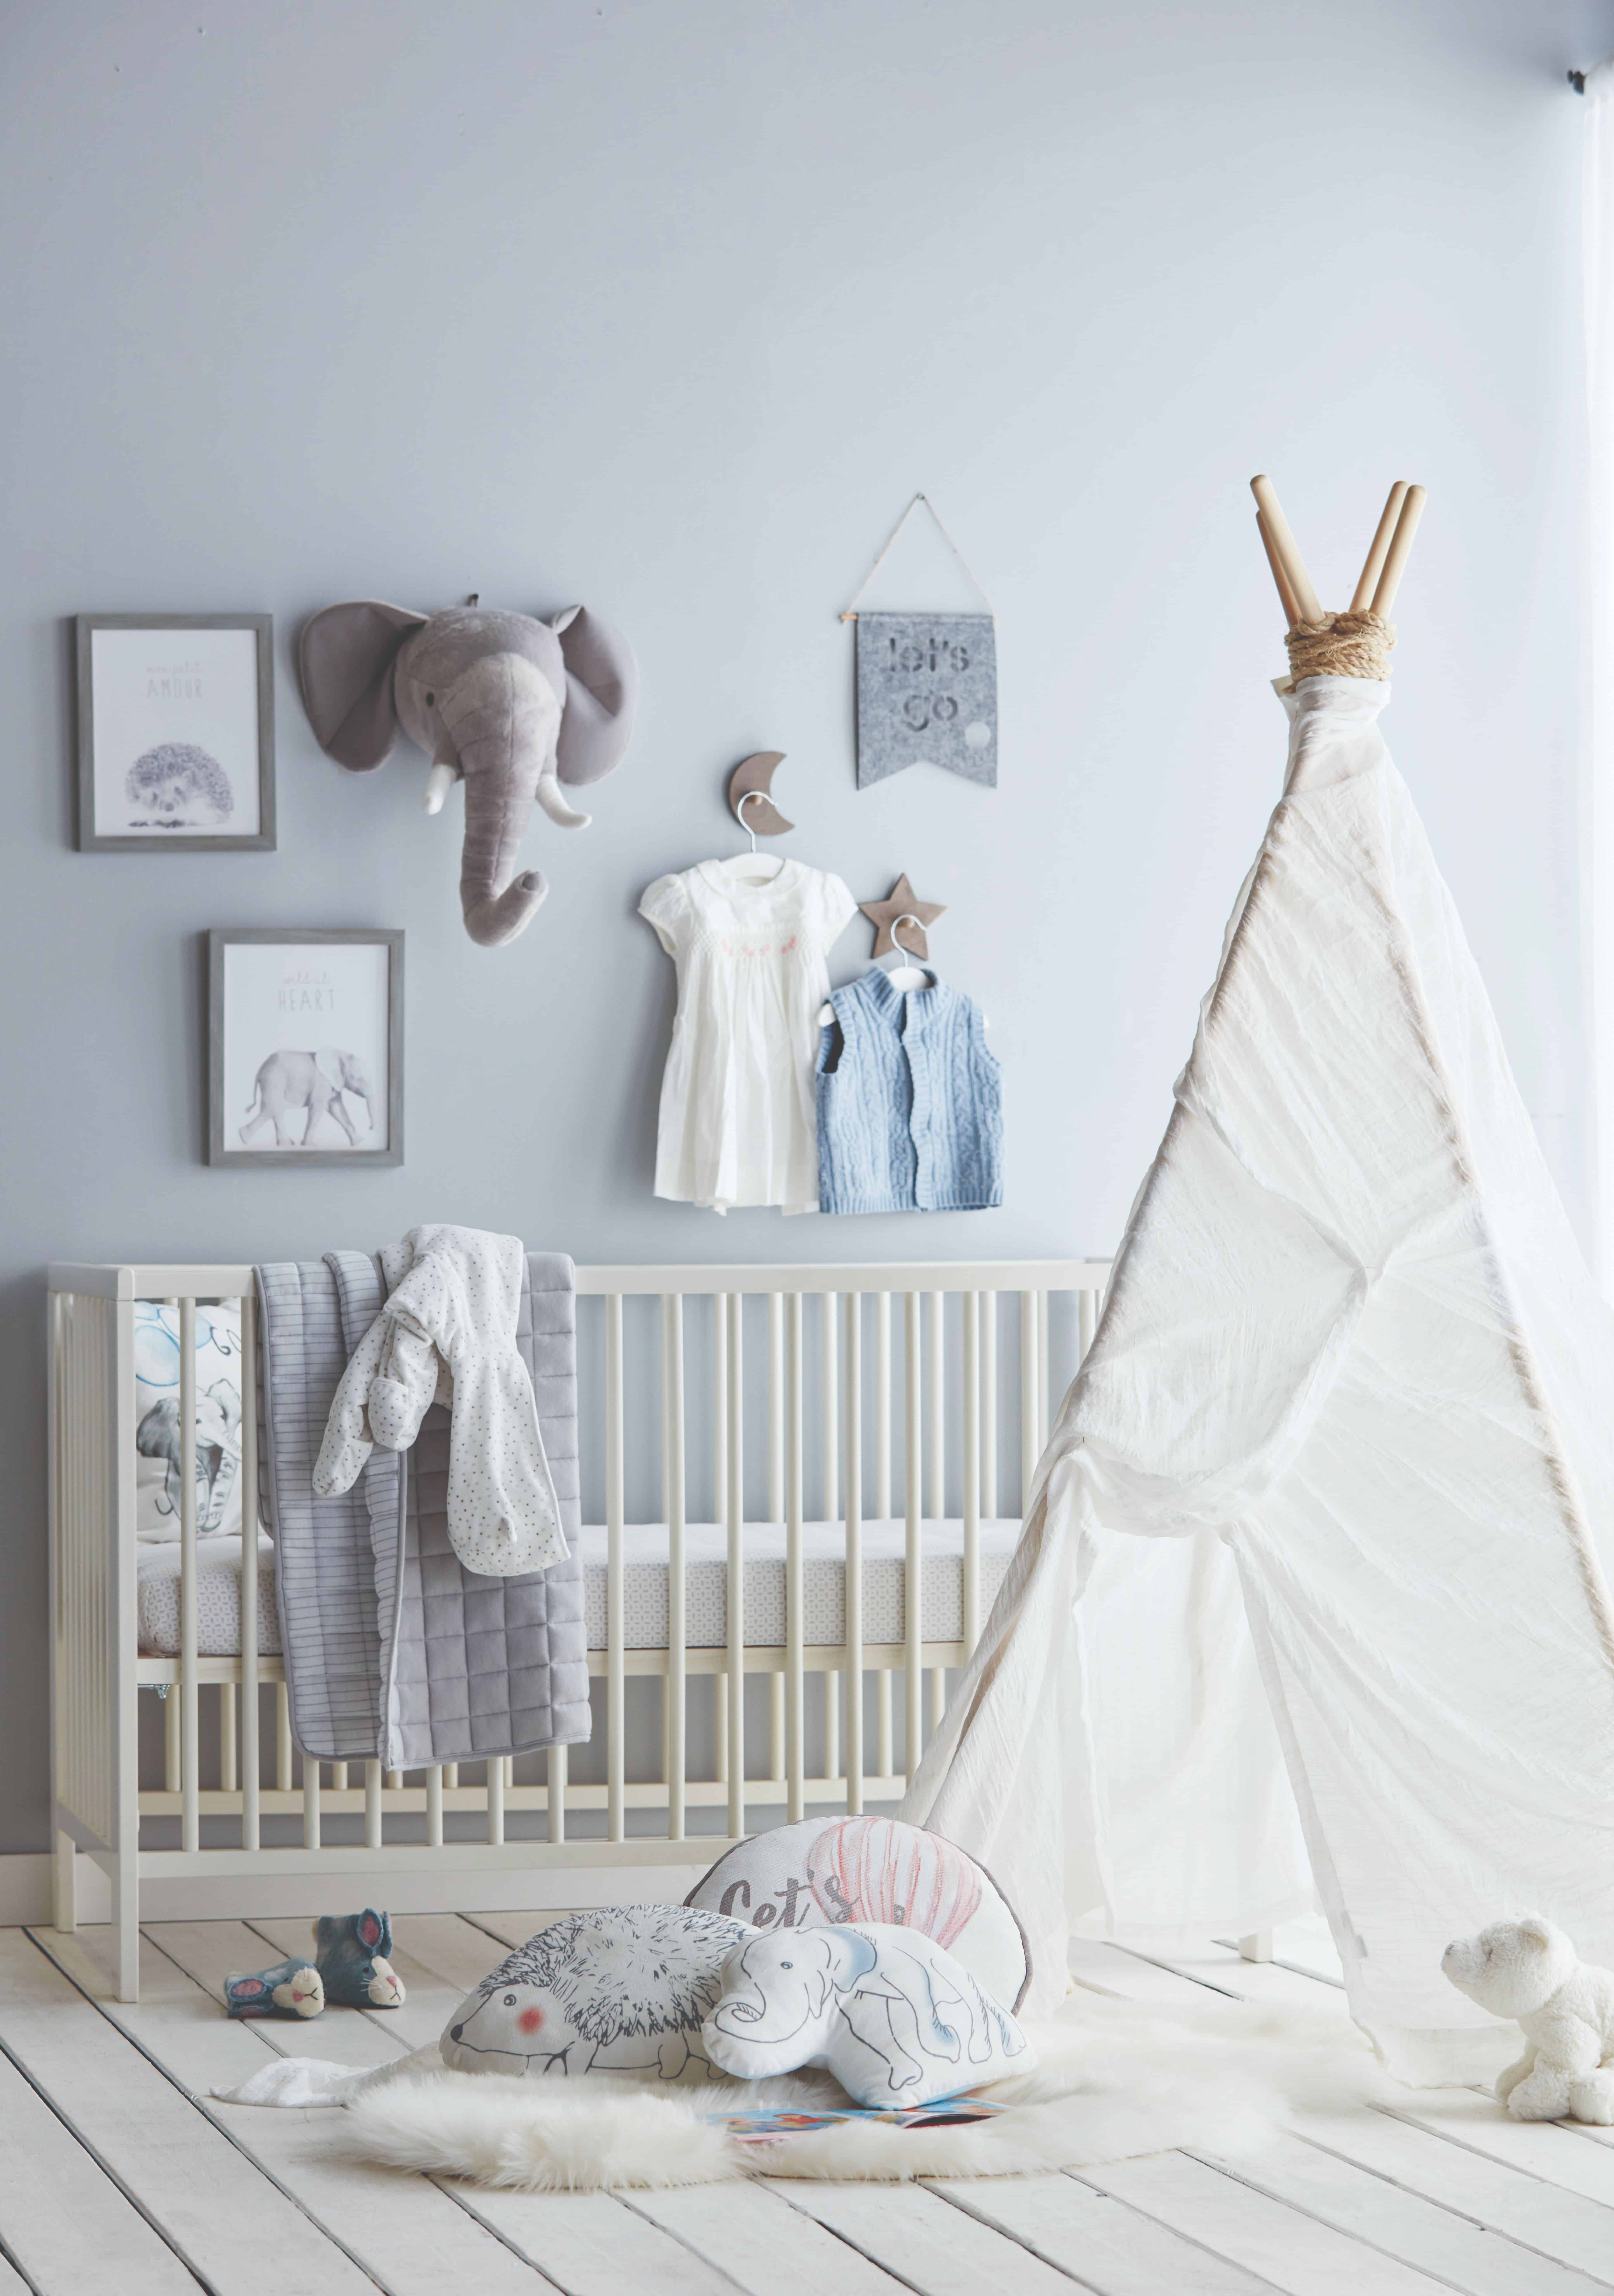 HOW TO DESIGN A TRANSITIONAL NURSERY